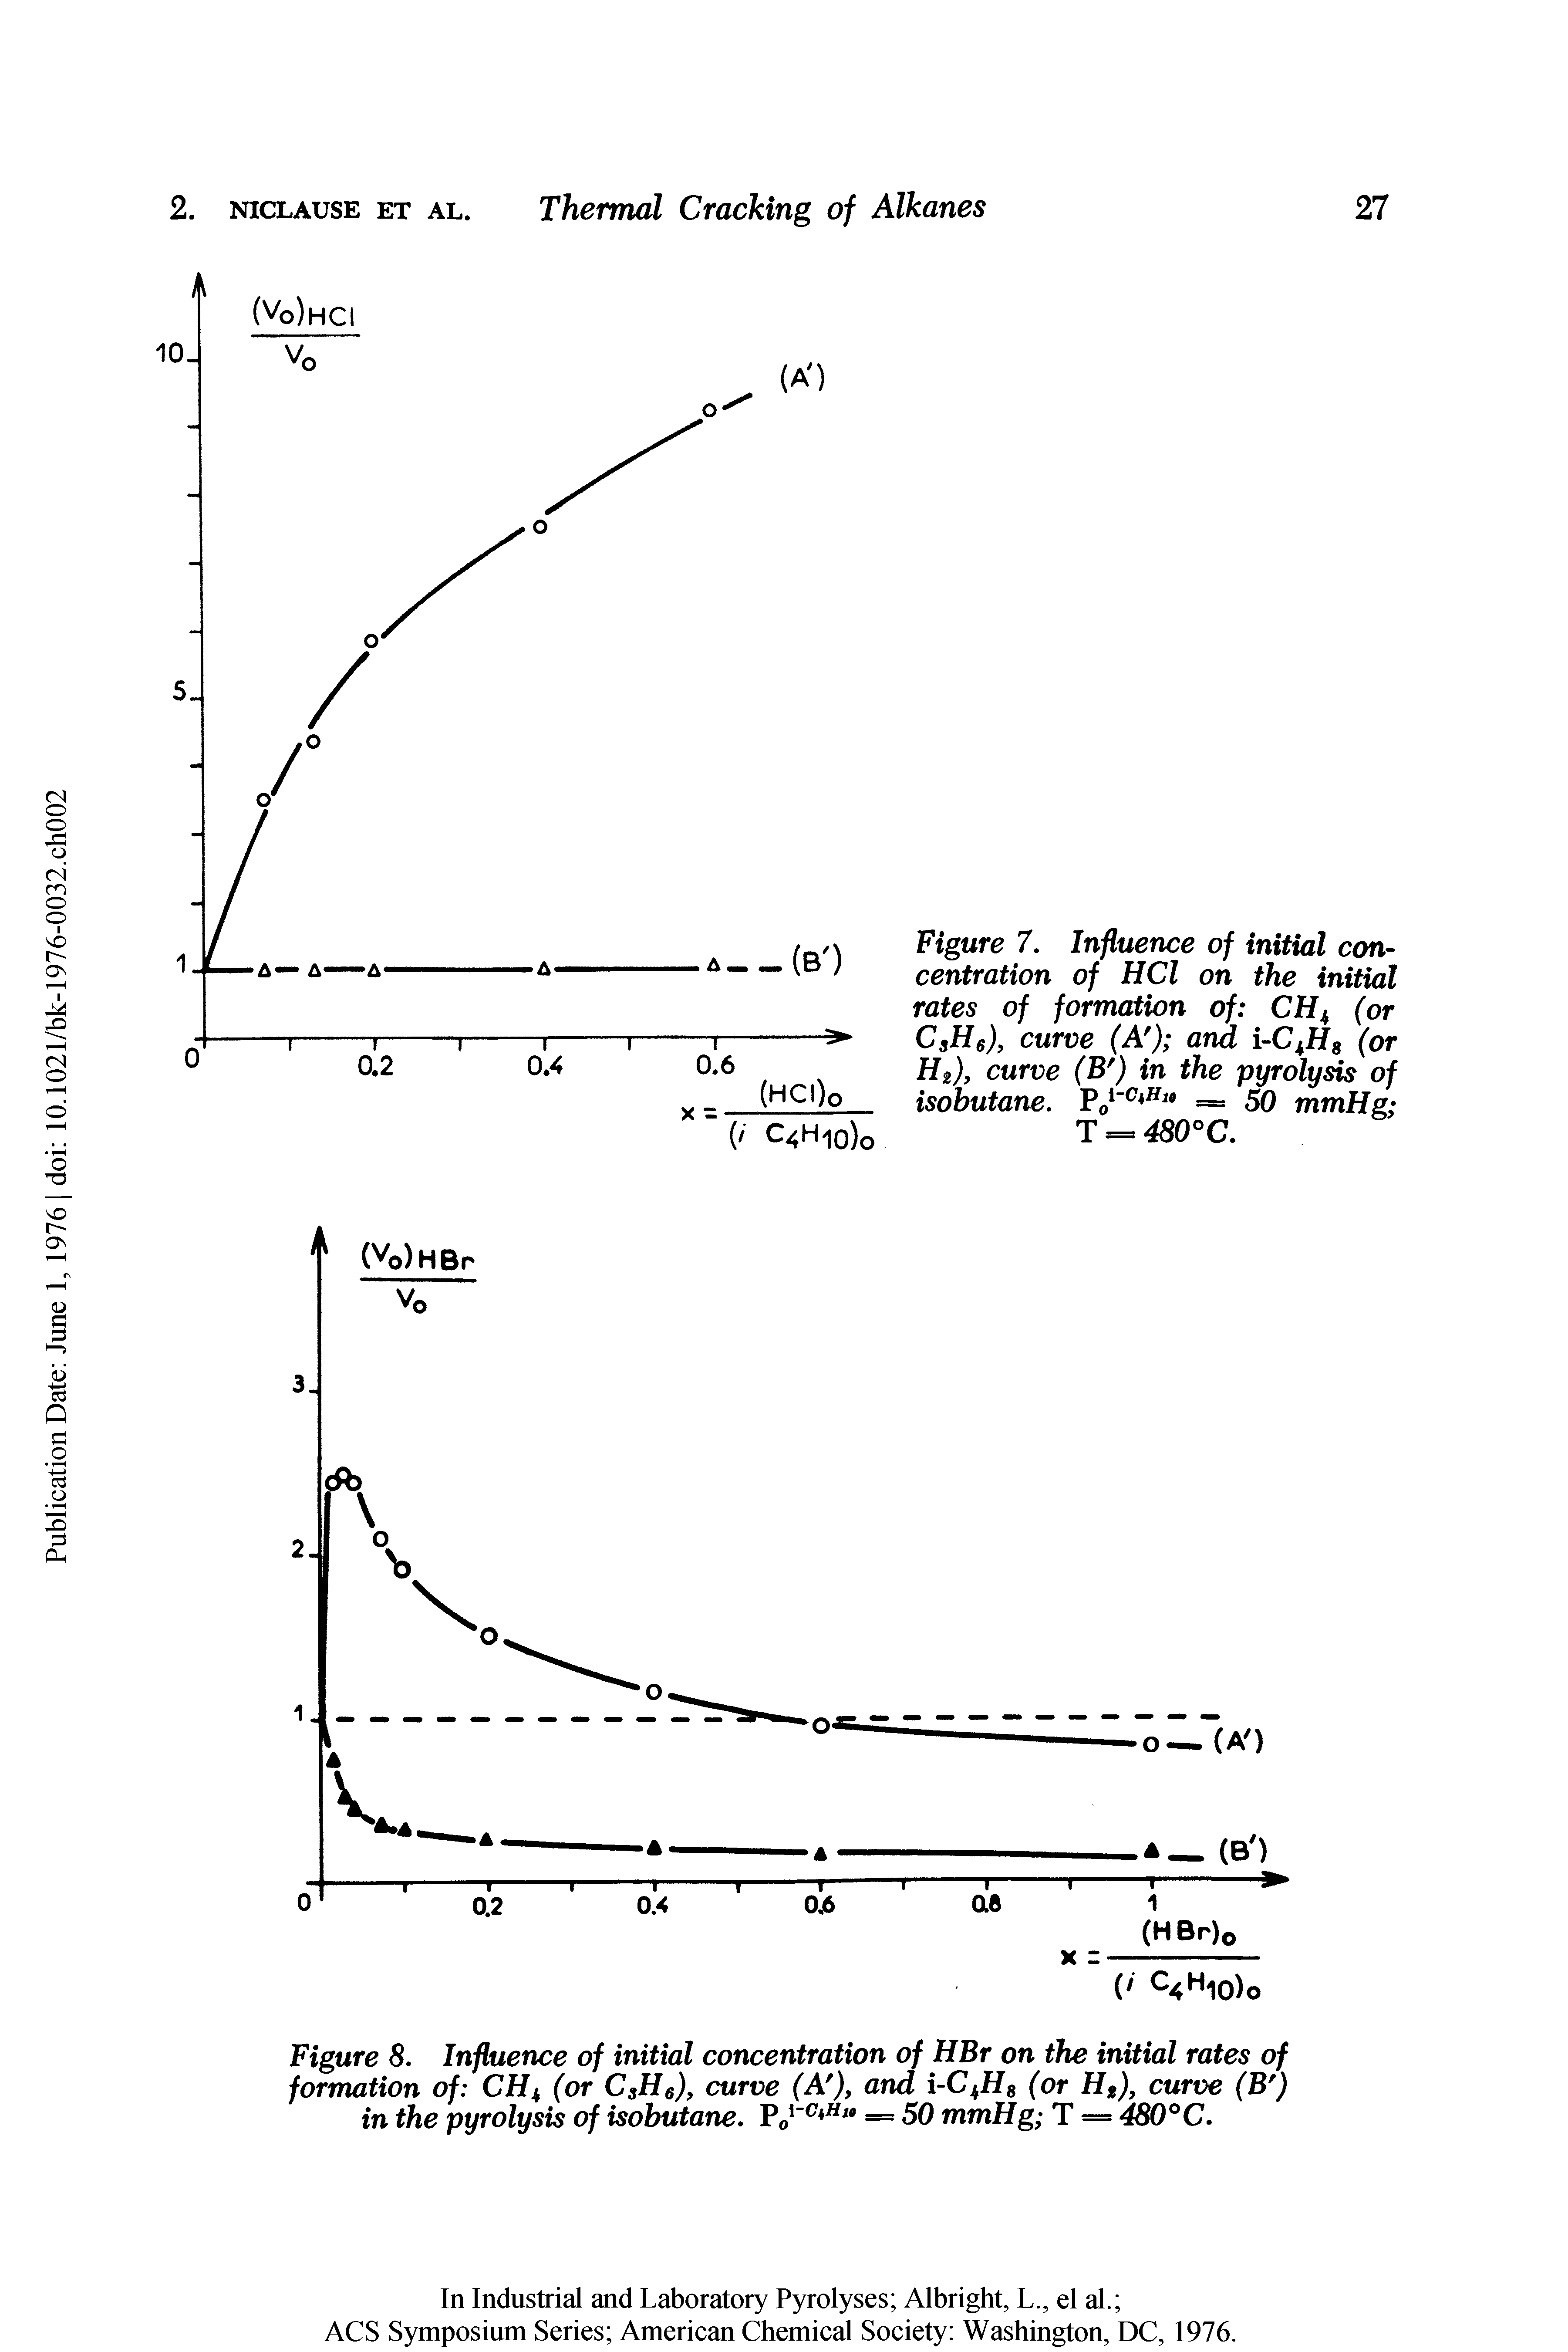 Figure 8. Influence of initial concentration of HBr on the initial rates of formation of CH4 (or CsHe), curve (A ), and i-C Hs (or Hg), curve (B ) in the pyrolysis of isobutane, = 50 mmHg T = 480°C.